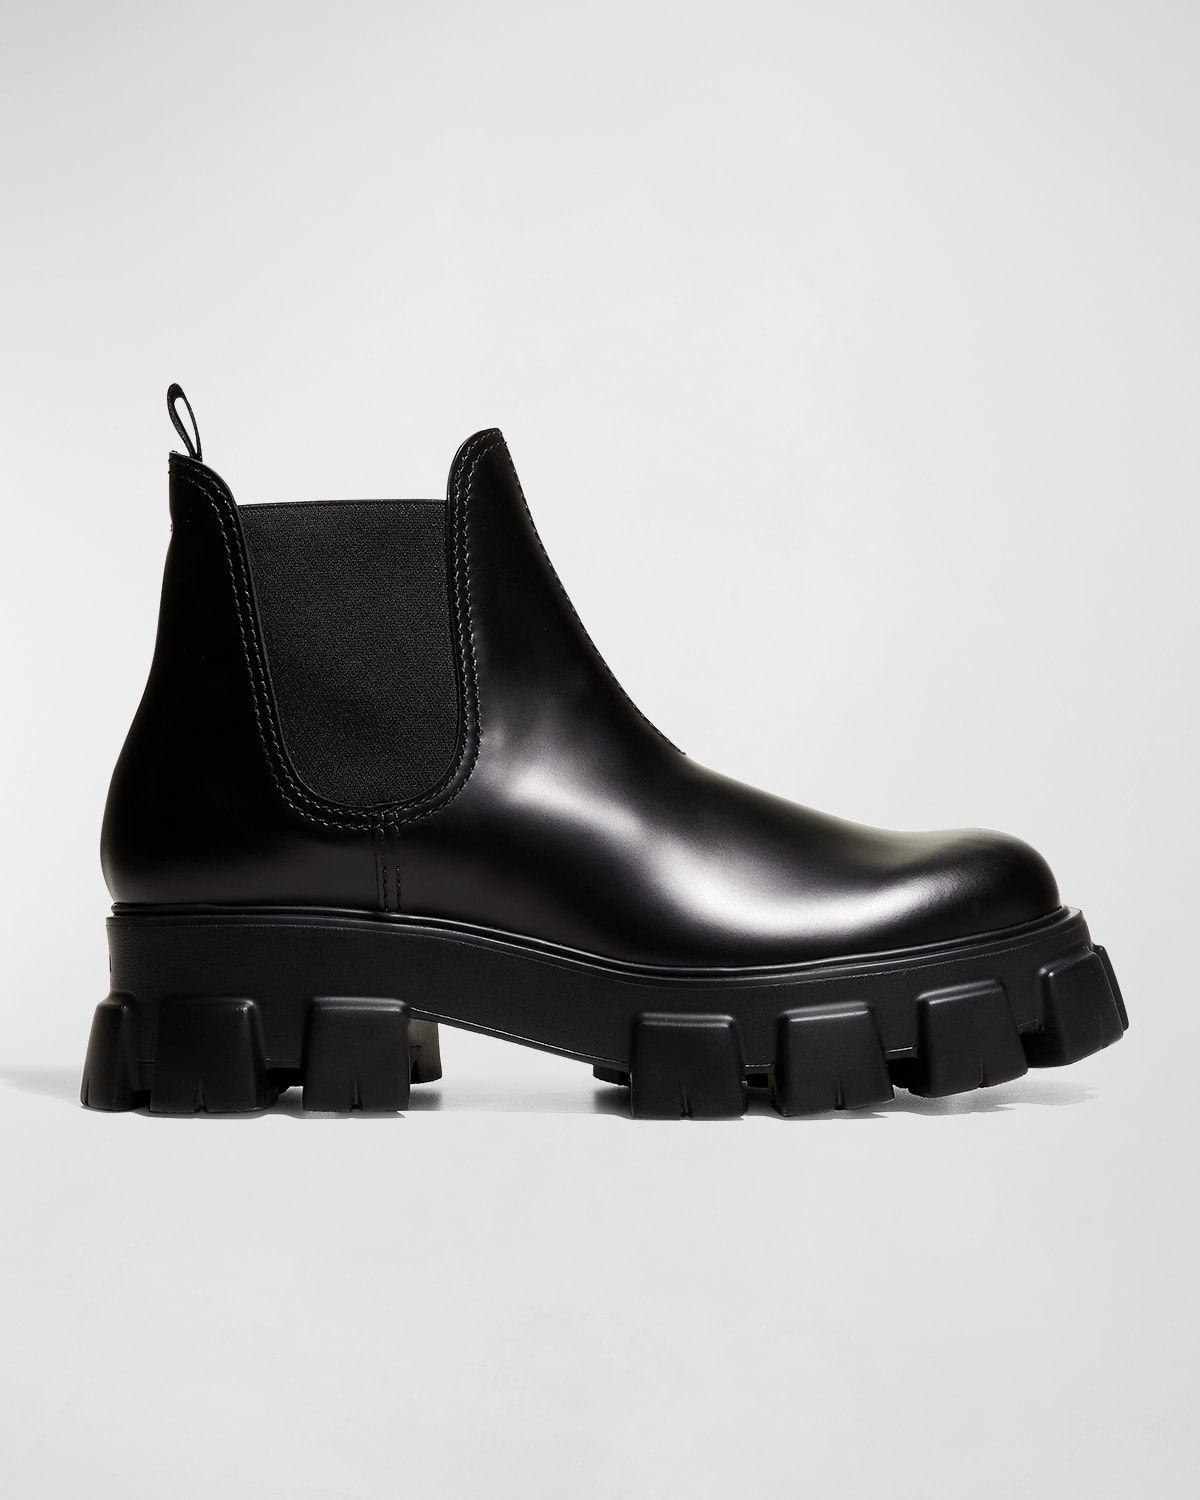 PRADA MEN'S MONOLITH BRUSHED LEATHER CHELSEA BOOTS